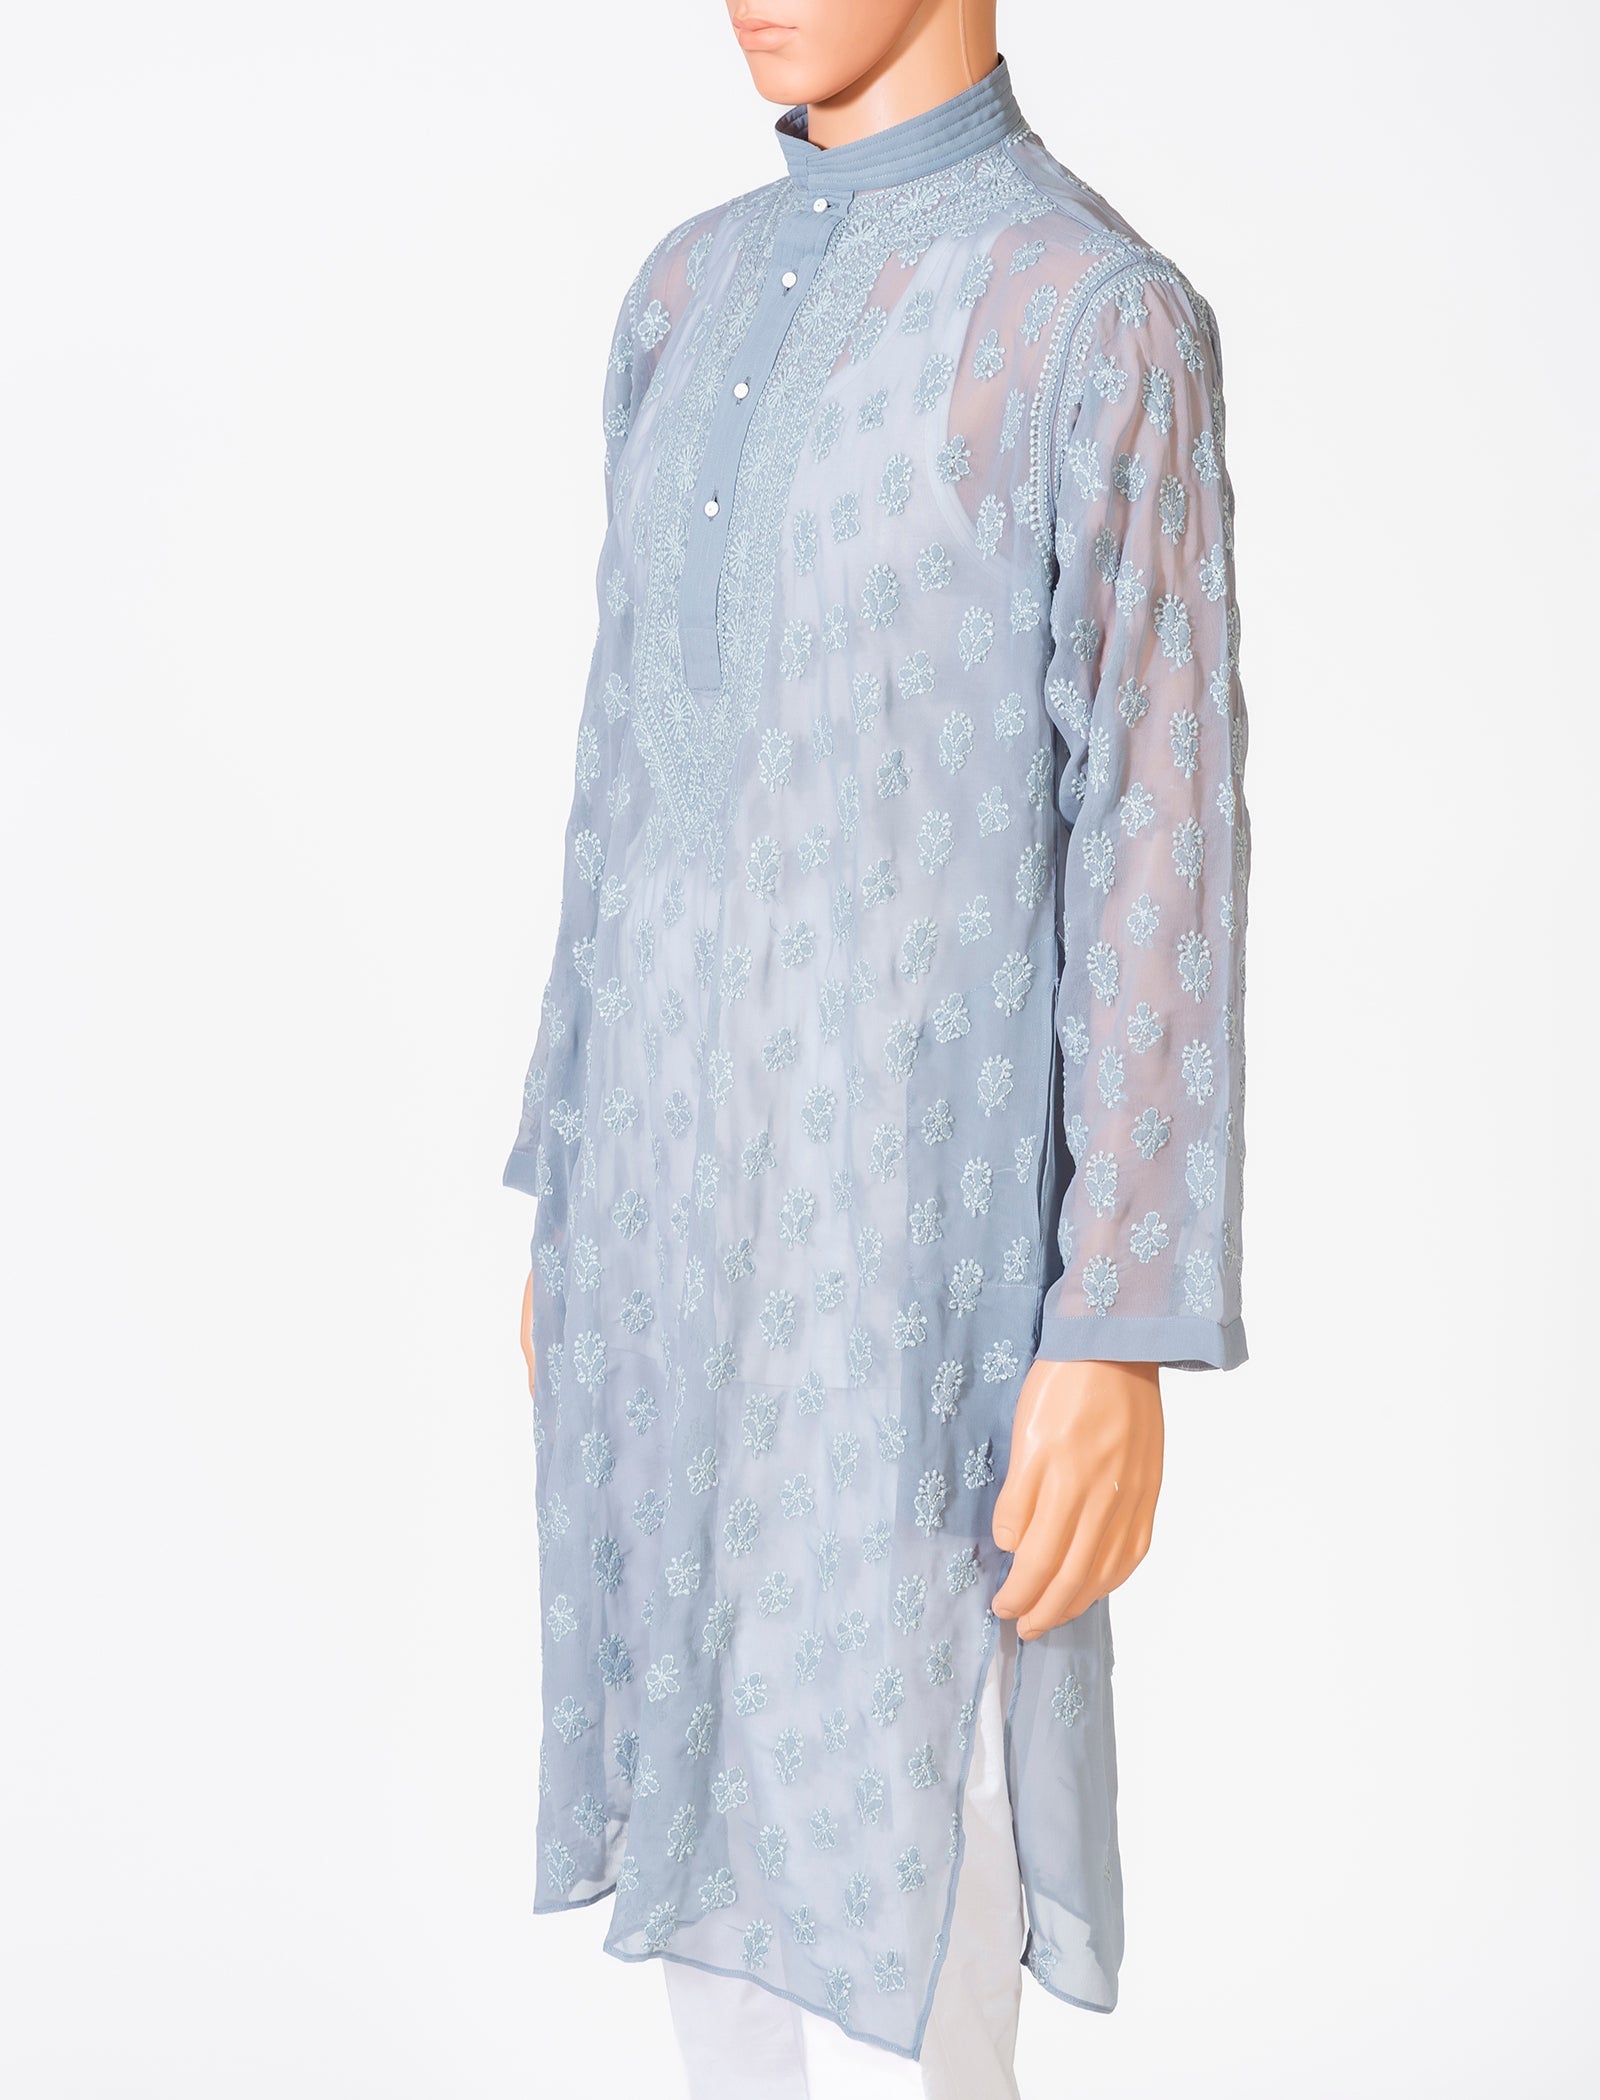 Lucknow Chikan Emporium Georgette Grey Colour Gents Kurta With Self Stripes And Fancy Hand Chikankari On Neck.